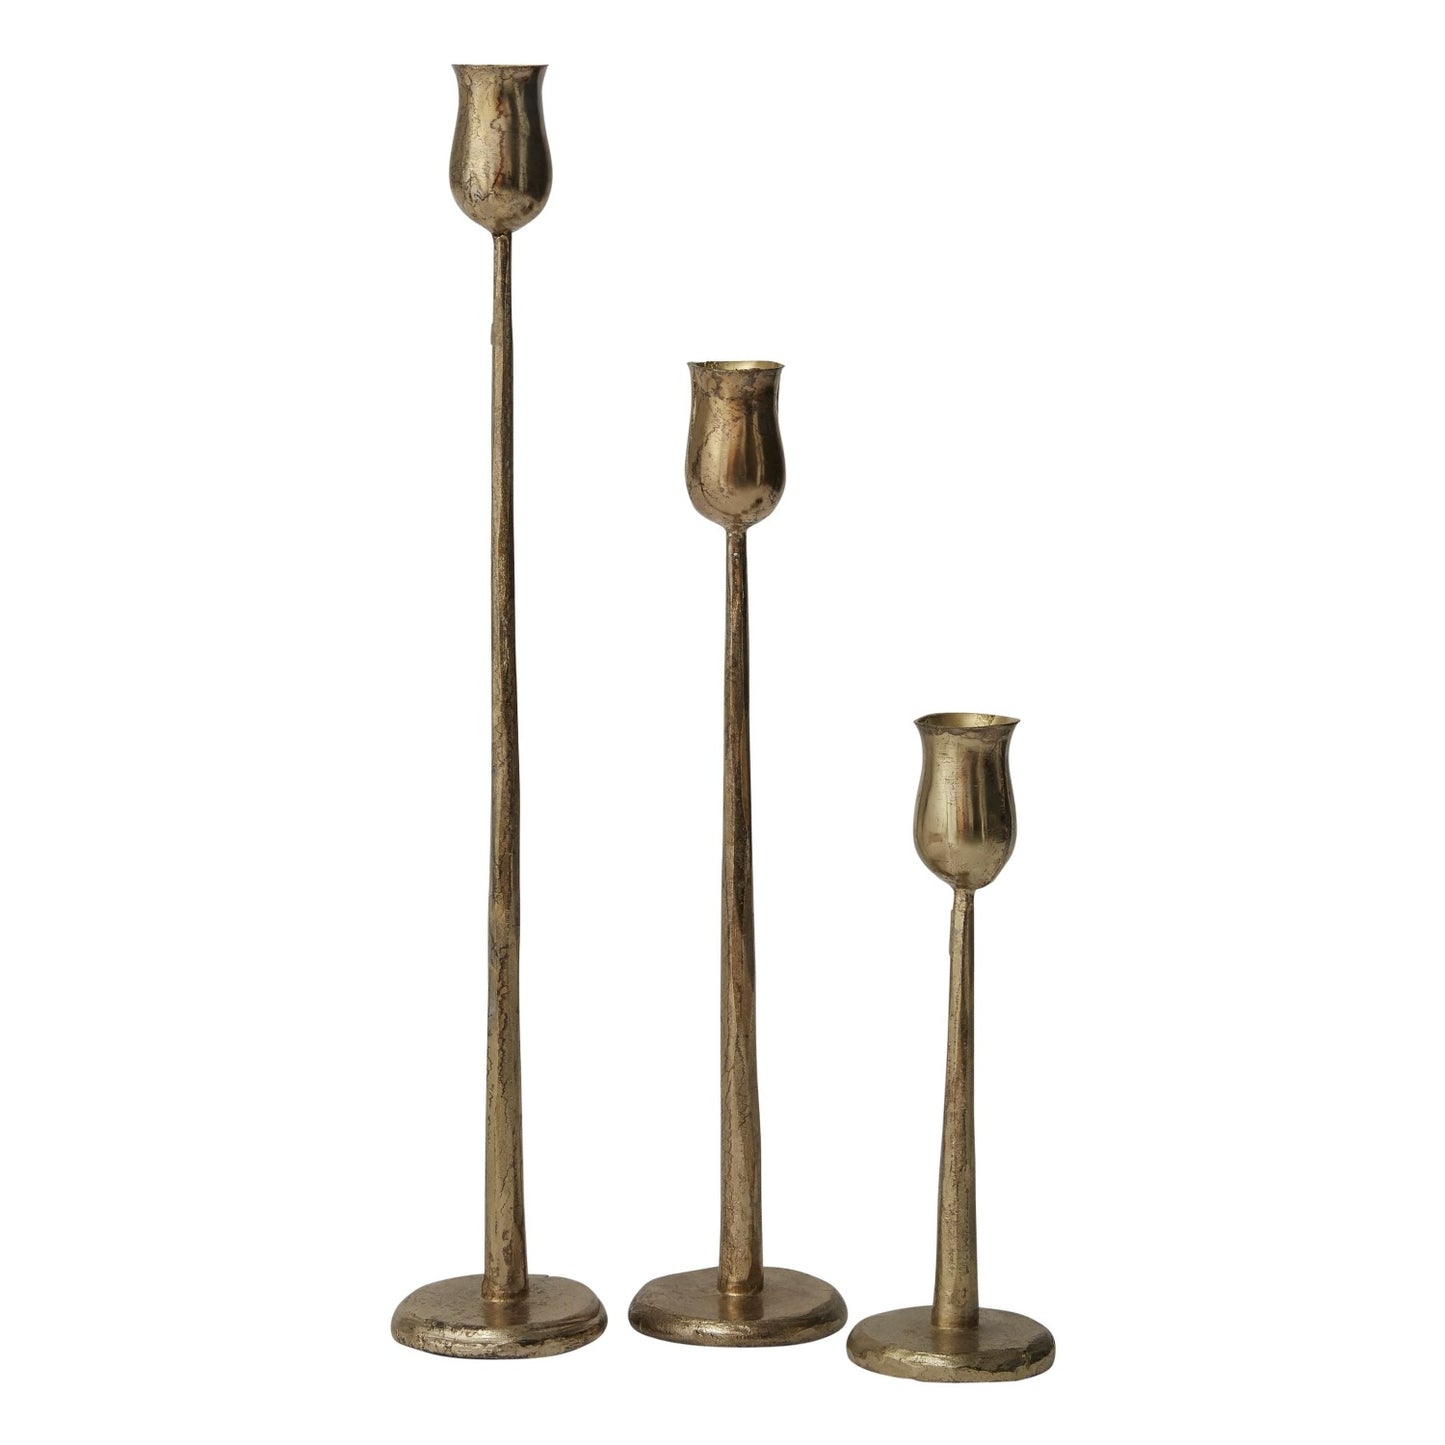 Zulu Candlestick,Gold Candlestick,Metal Candlestick,Elegant Silhouette,Household Accessory,Home Decor,Unique Design,3 Sizes,Sold Separately,Metal Design,Gold